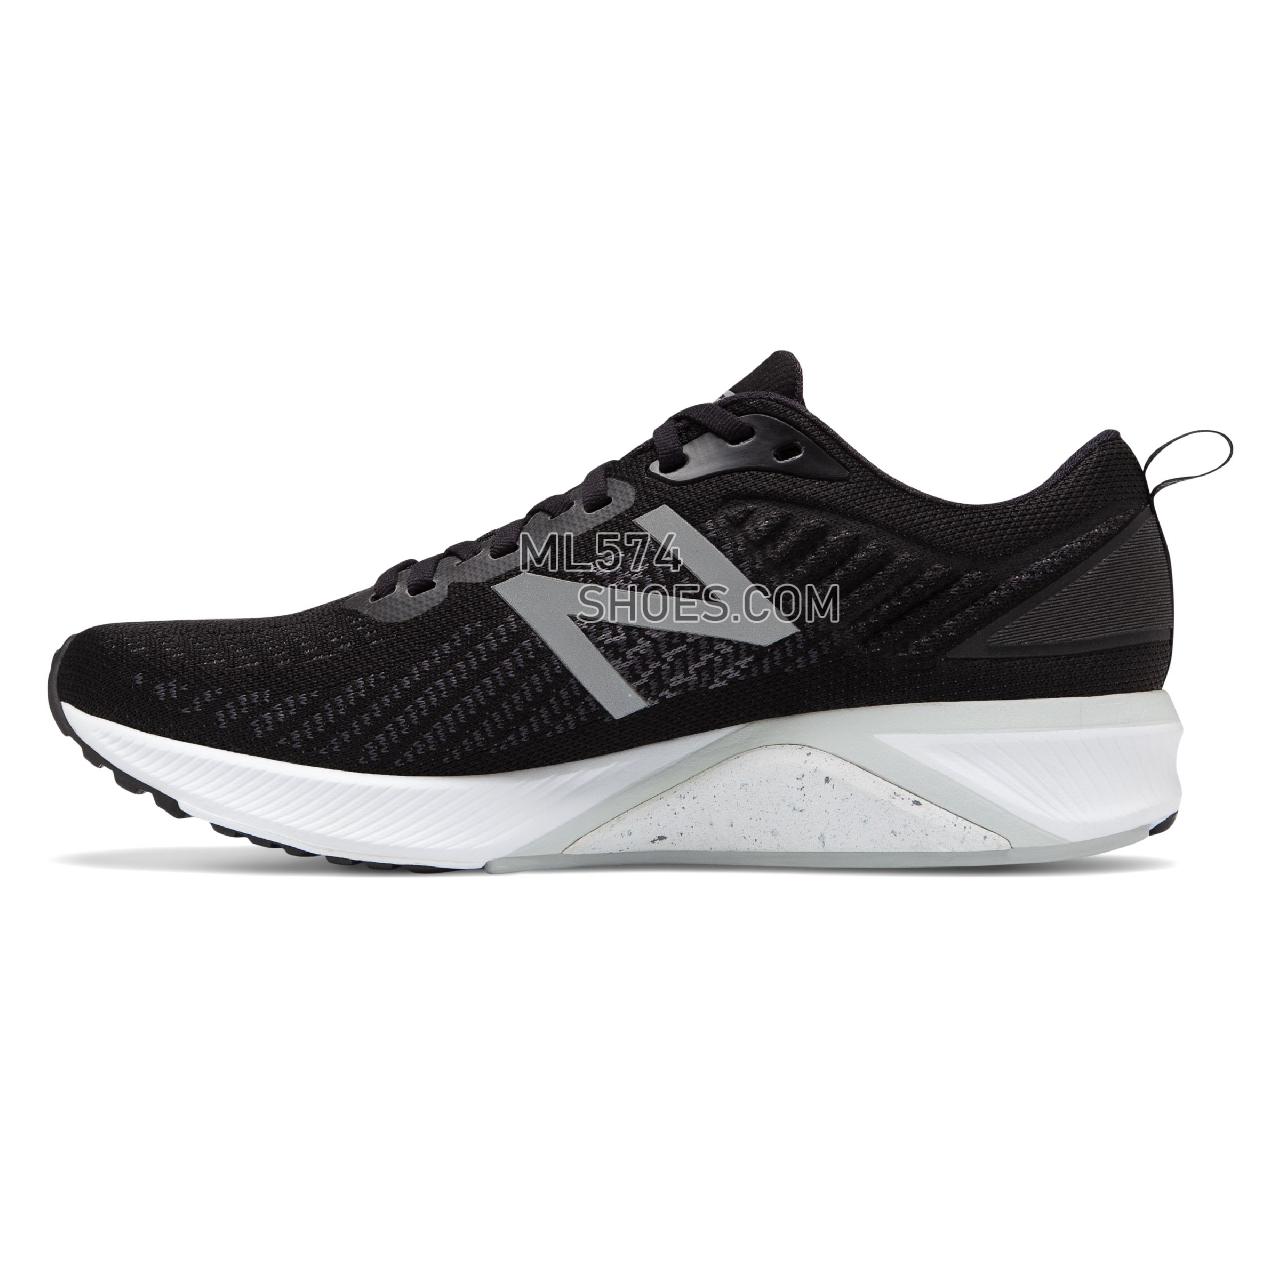 New Balance 870v5 - Men's Stability Running - Black with White and Orca - M870BW5